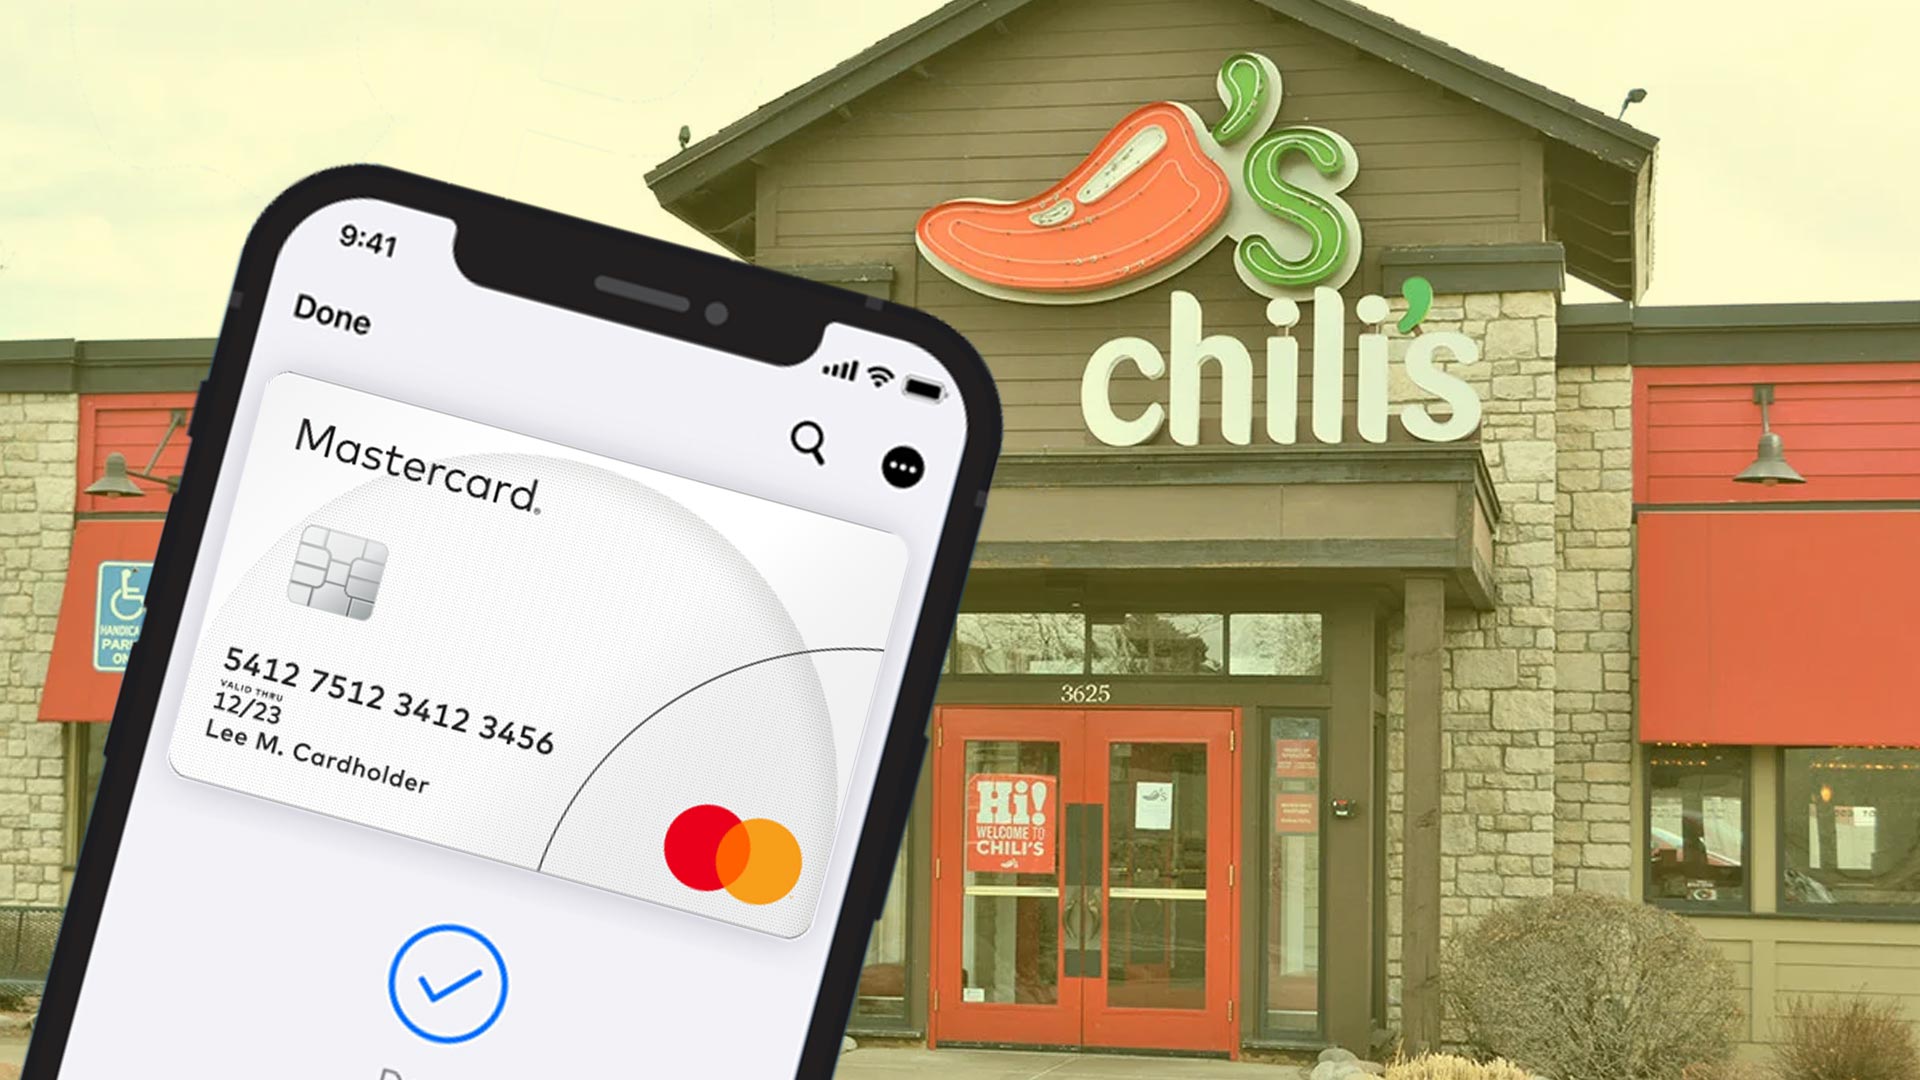 Does Chilis Accept Apple Pay